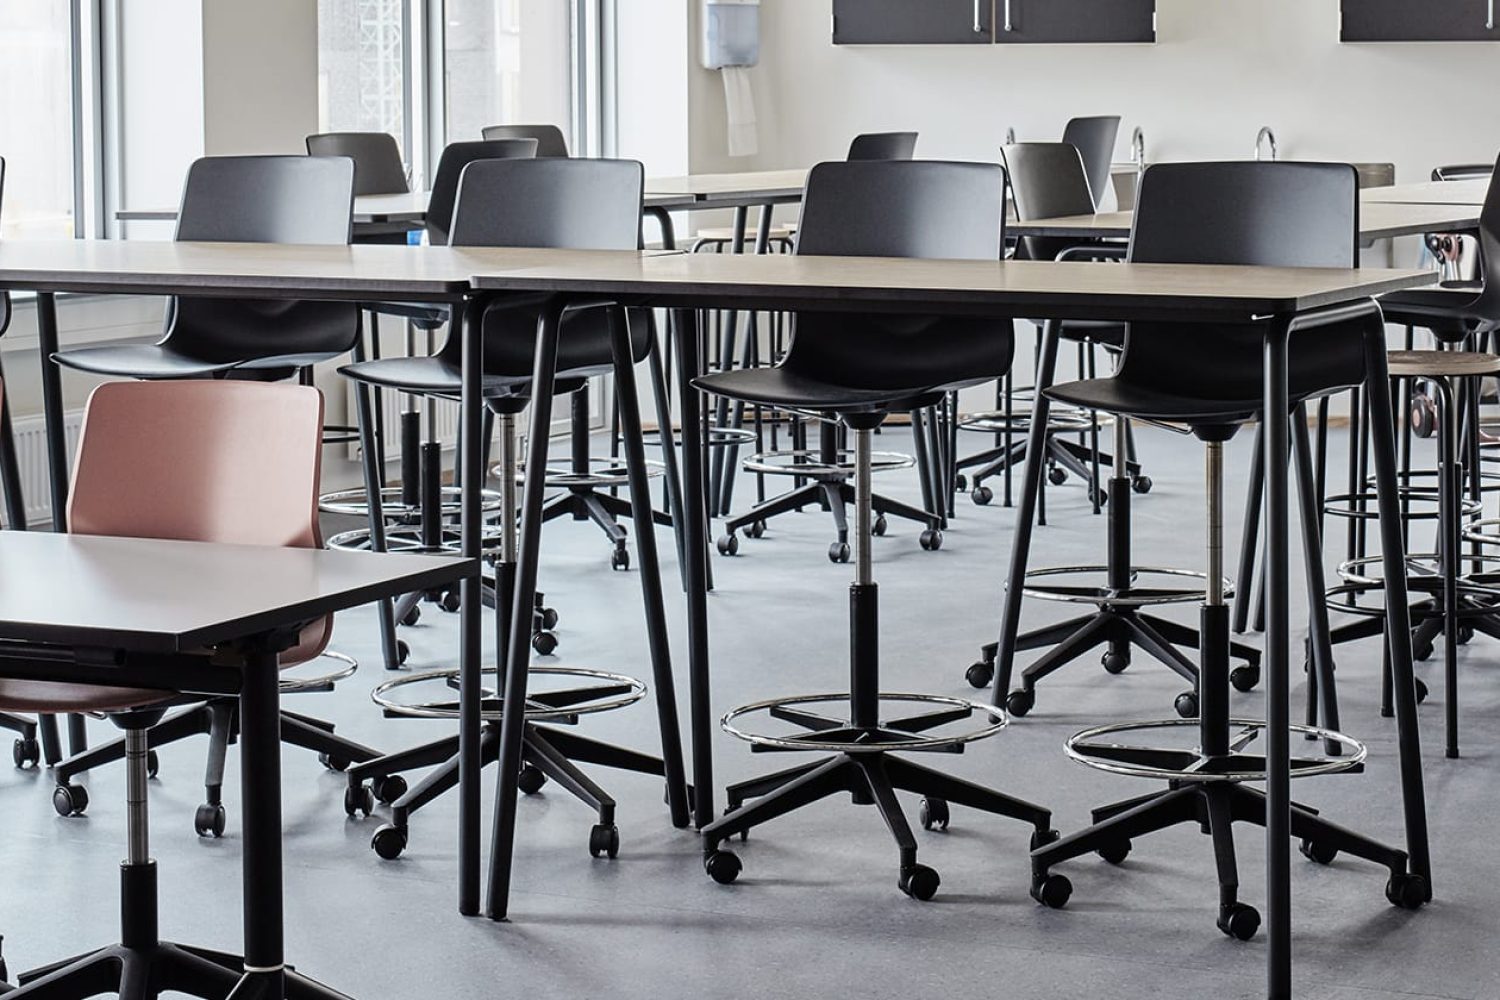 A classroom with a lot of office desk chairs and standing height tables.